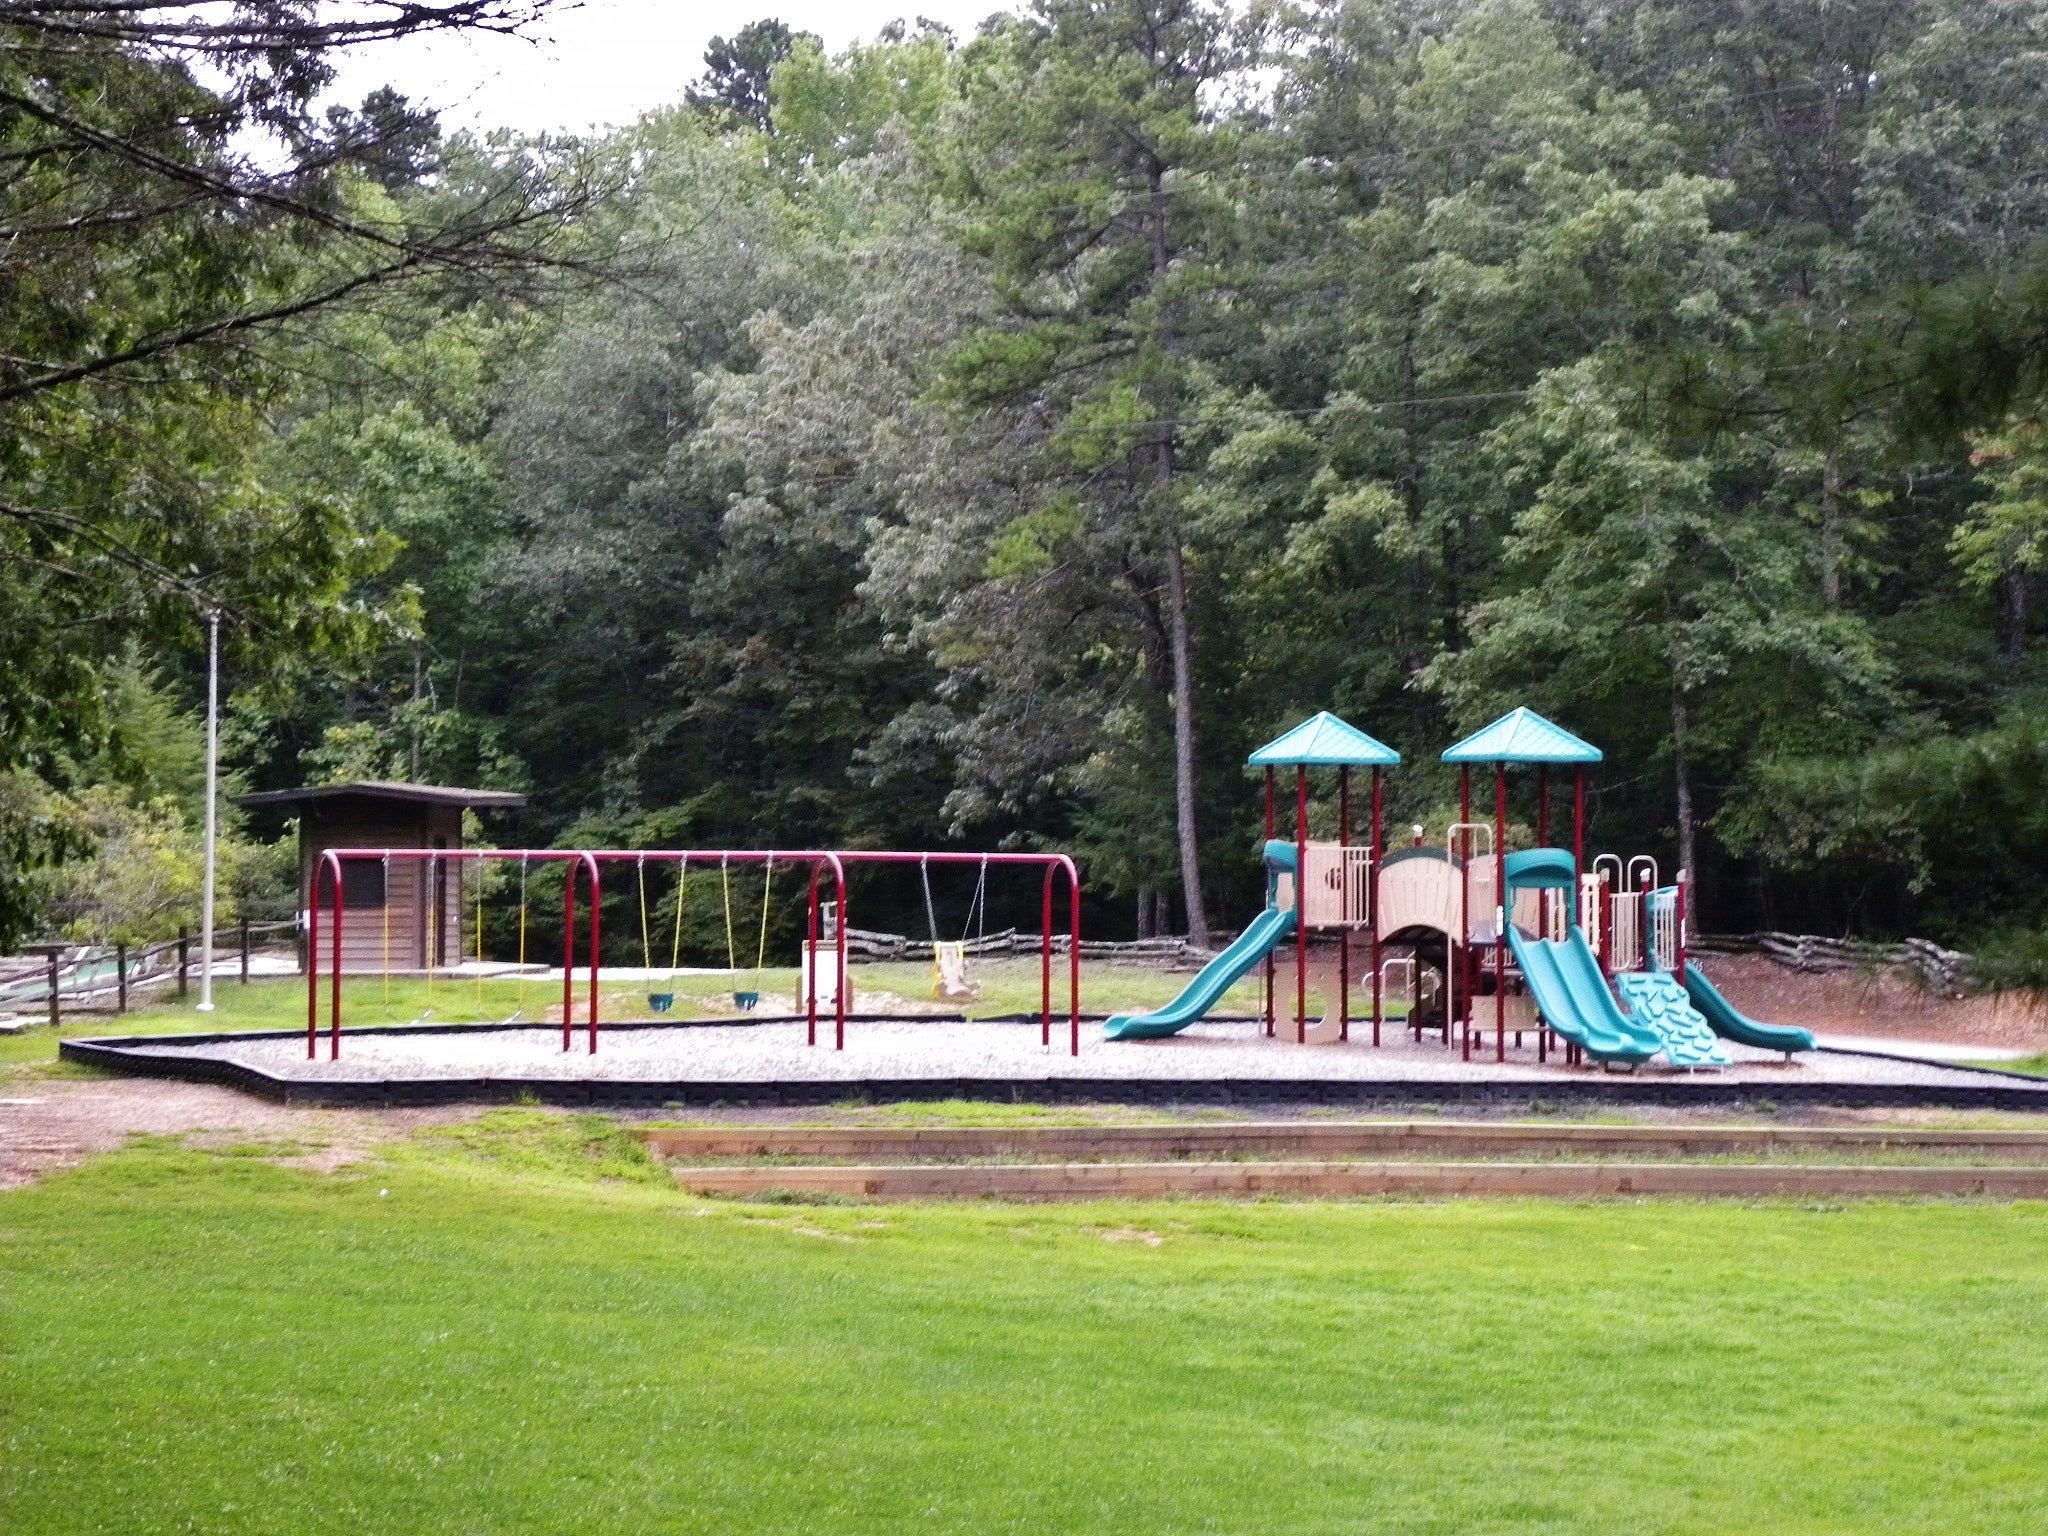 Campers are urged not to use the playground because of COVID-19.